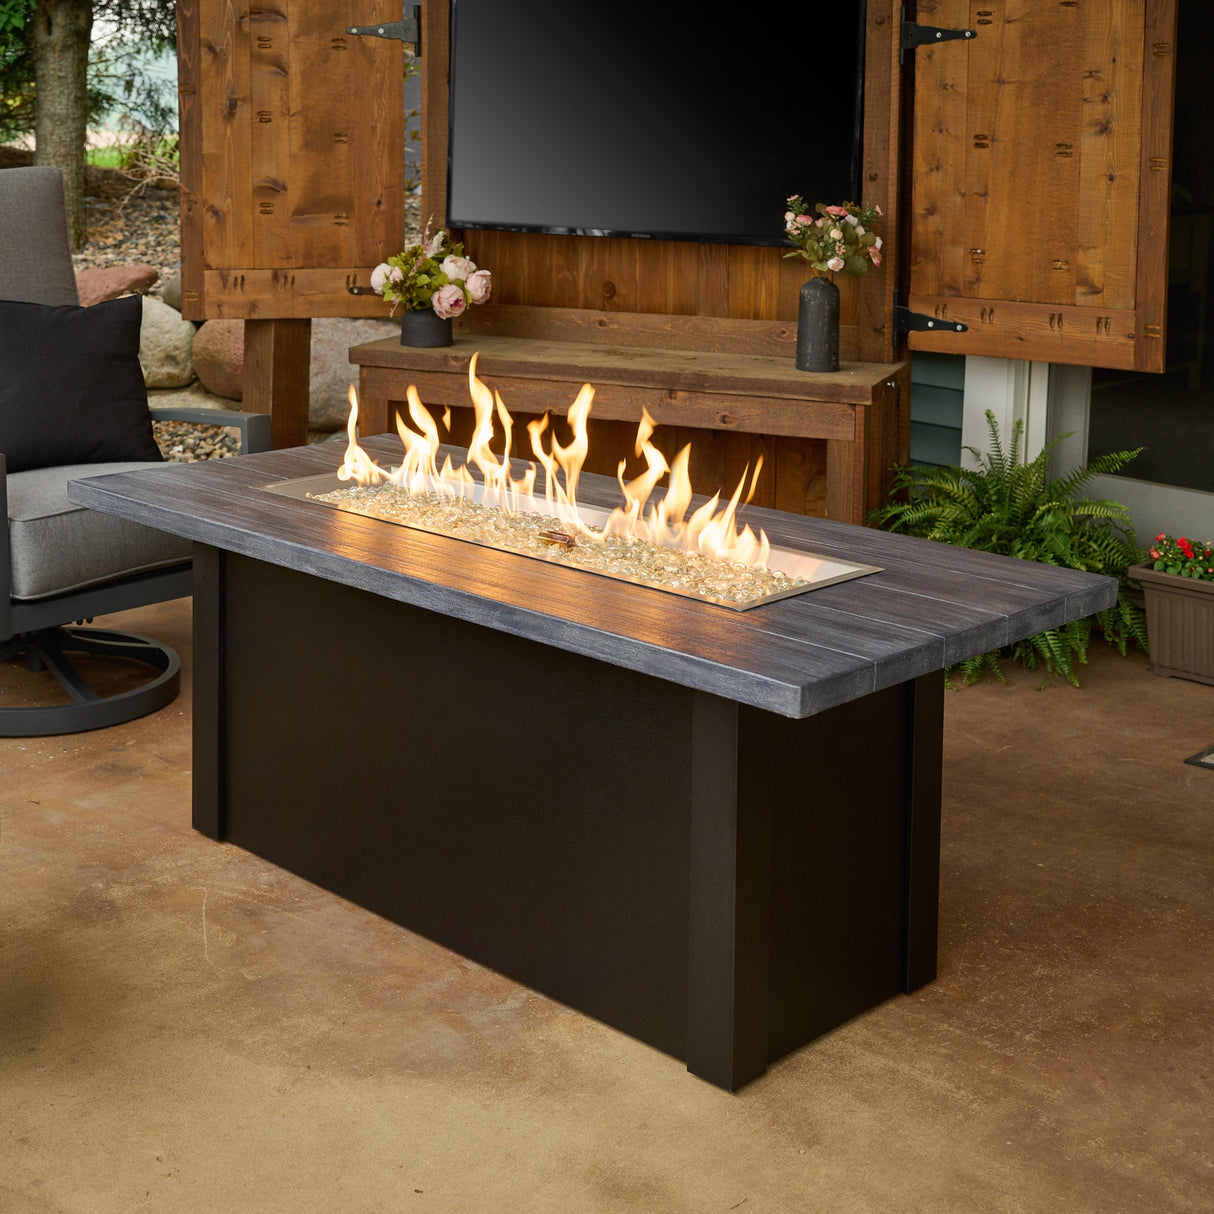 The Havenwood Linear Gas Fire Pit Table with a Carbon Grey top and Luverne Black base in a scenic outdoor patio